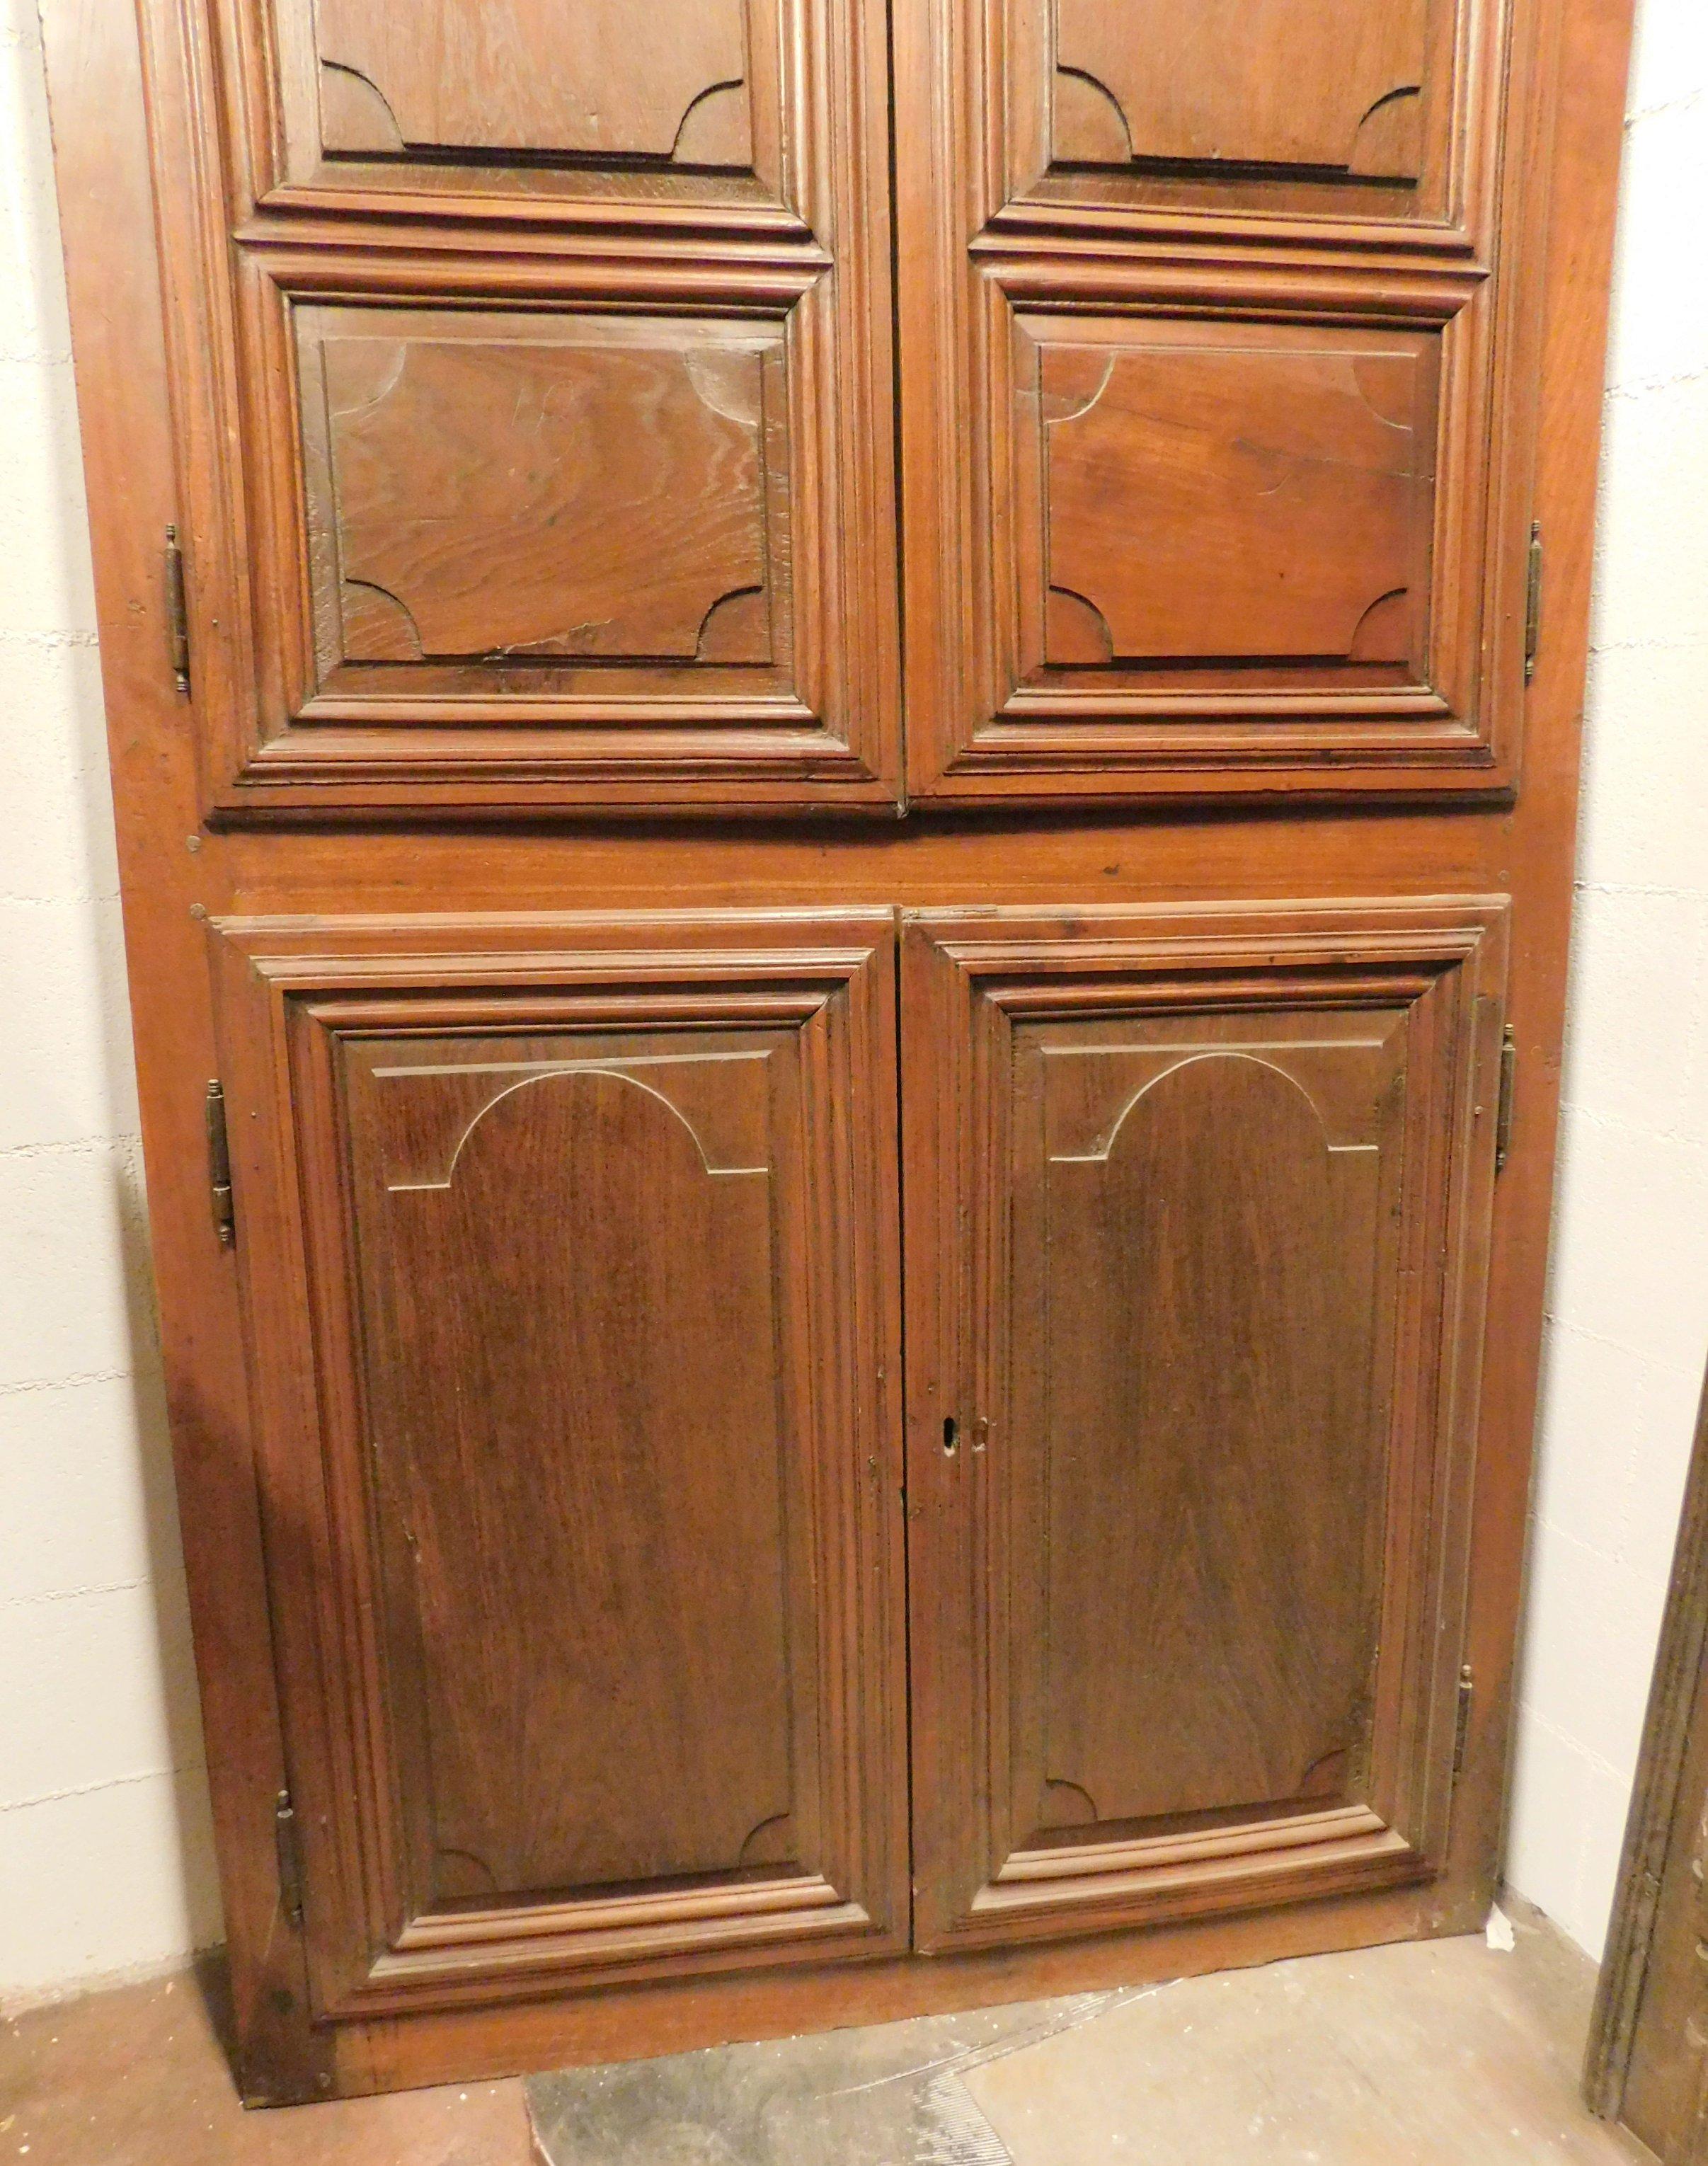 Hand-Carved Antique Wall Cabinet Door Placard Carved Walnut, Four Doors, 18th Century, Italy For Sale